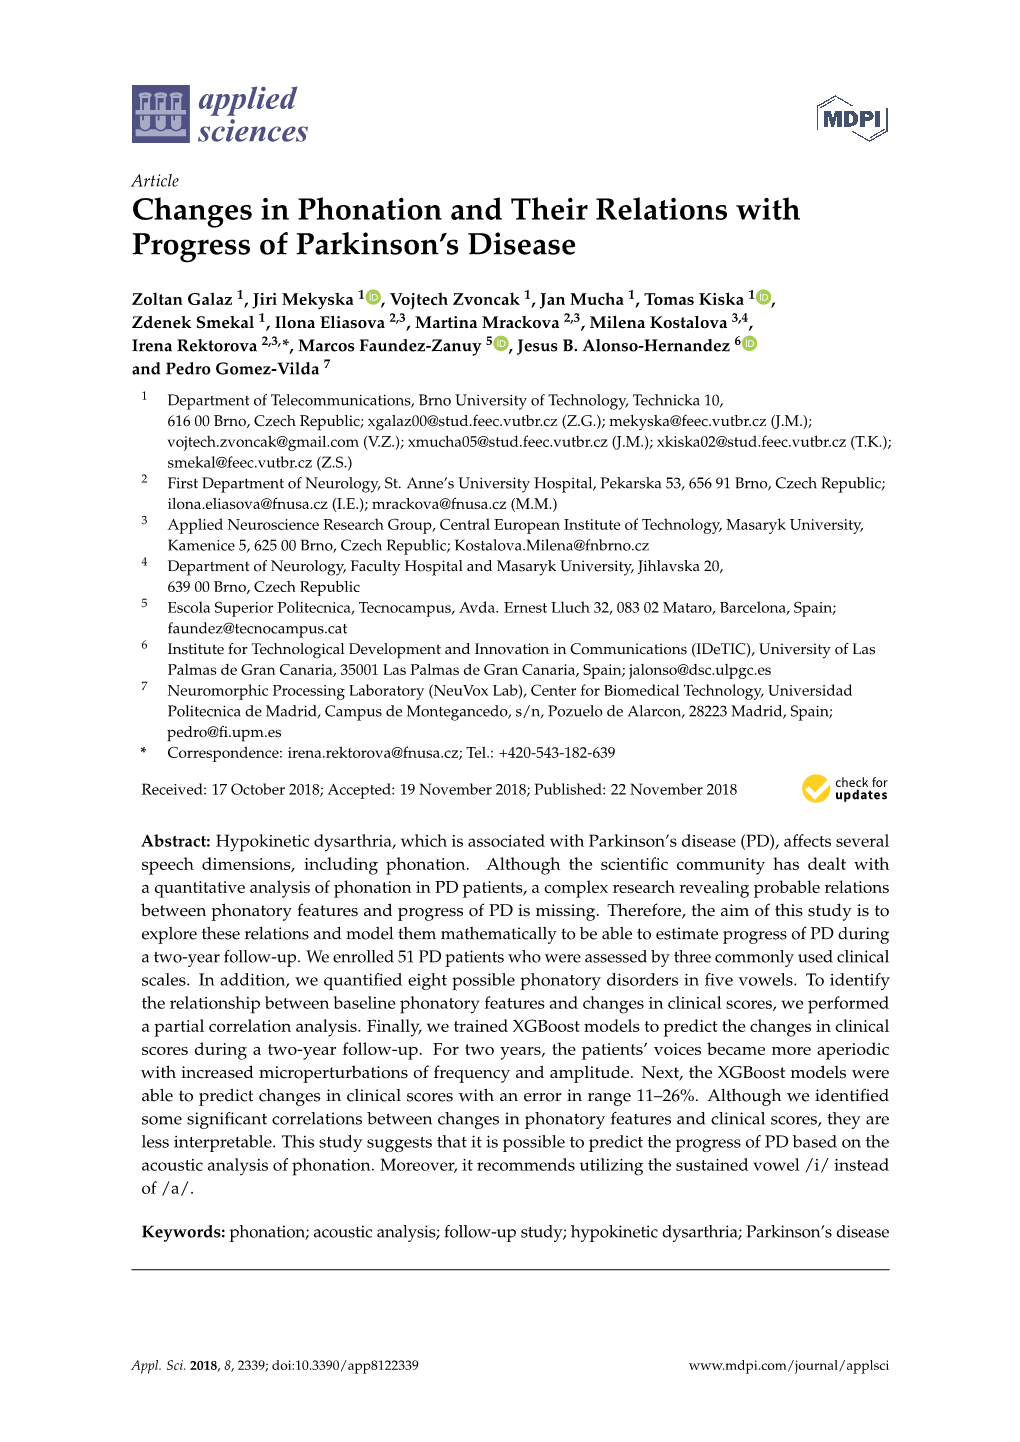 Changes in Phonation and Their Relations with Progress of Parkinson’S Disease